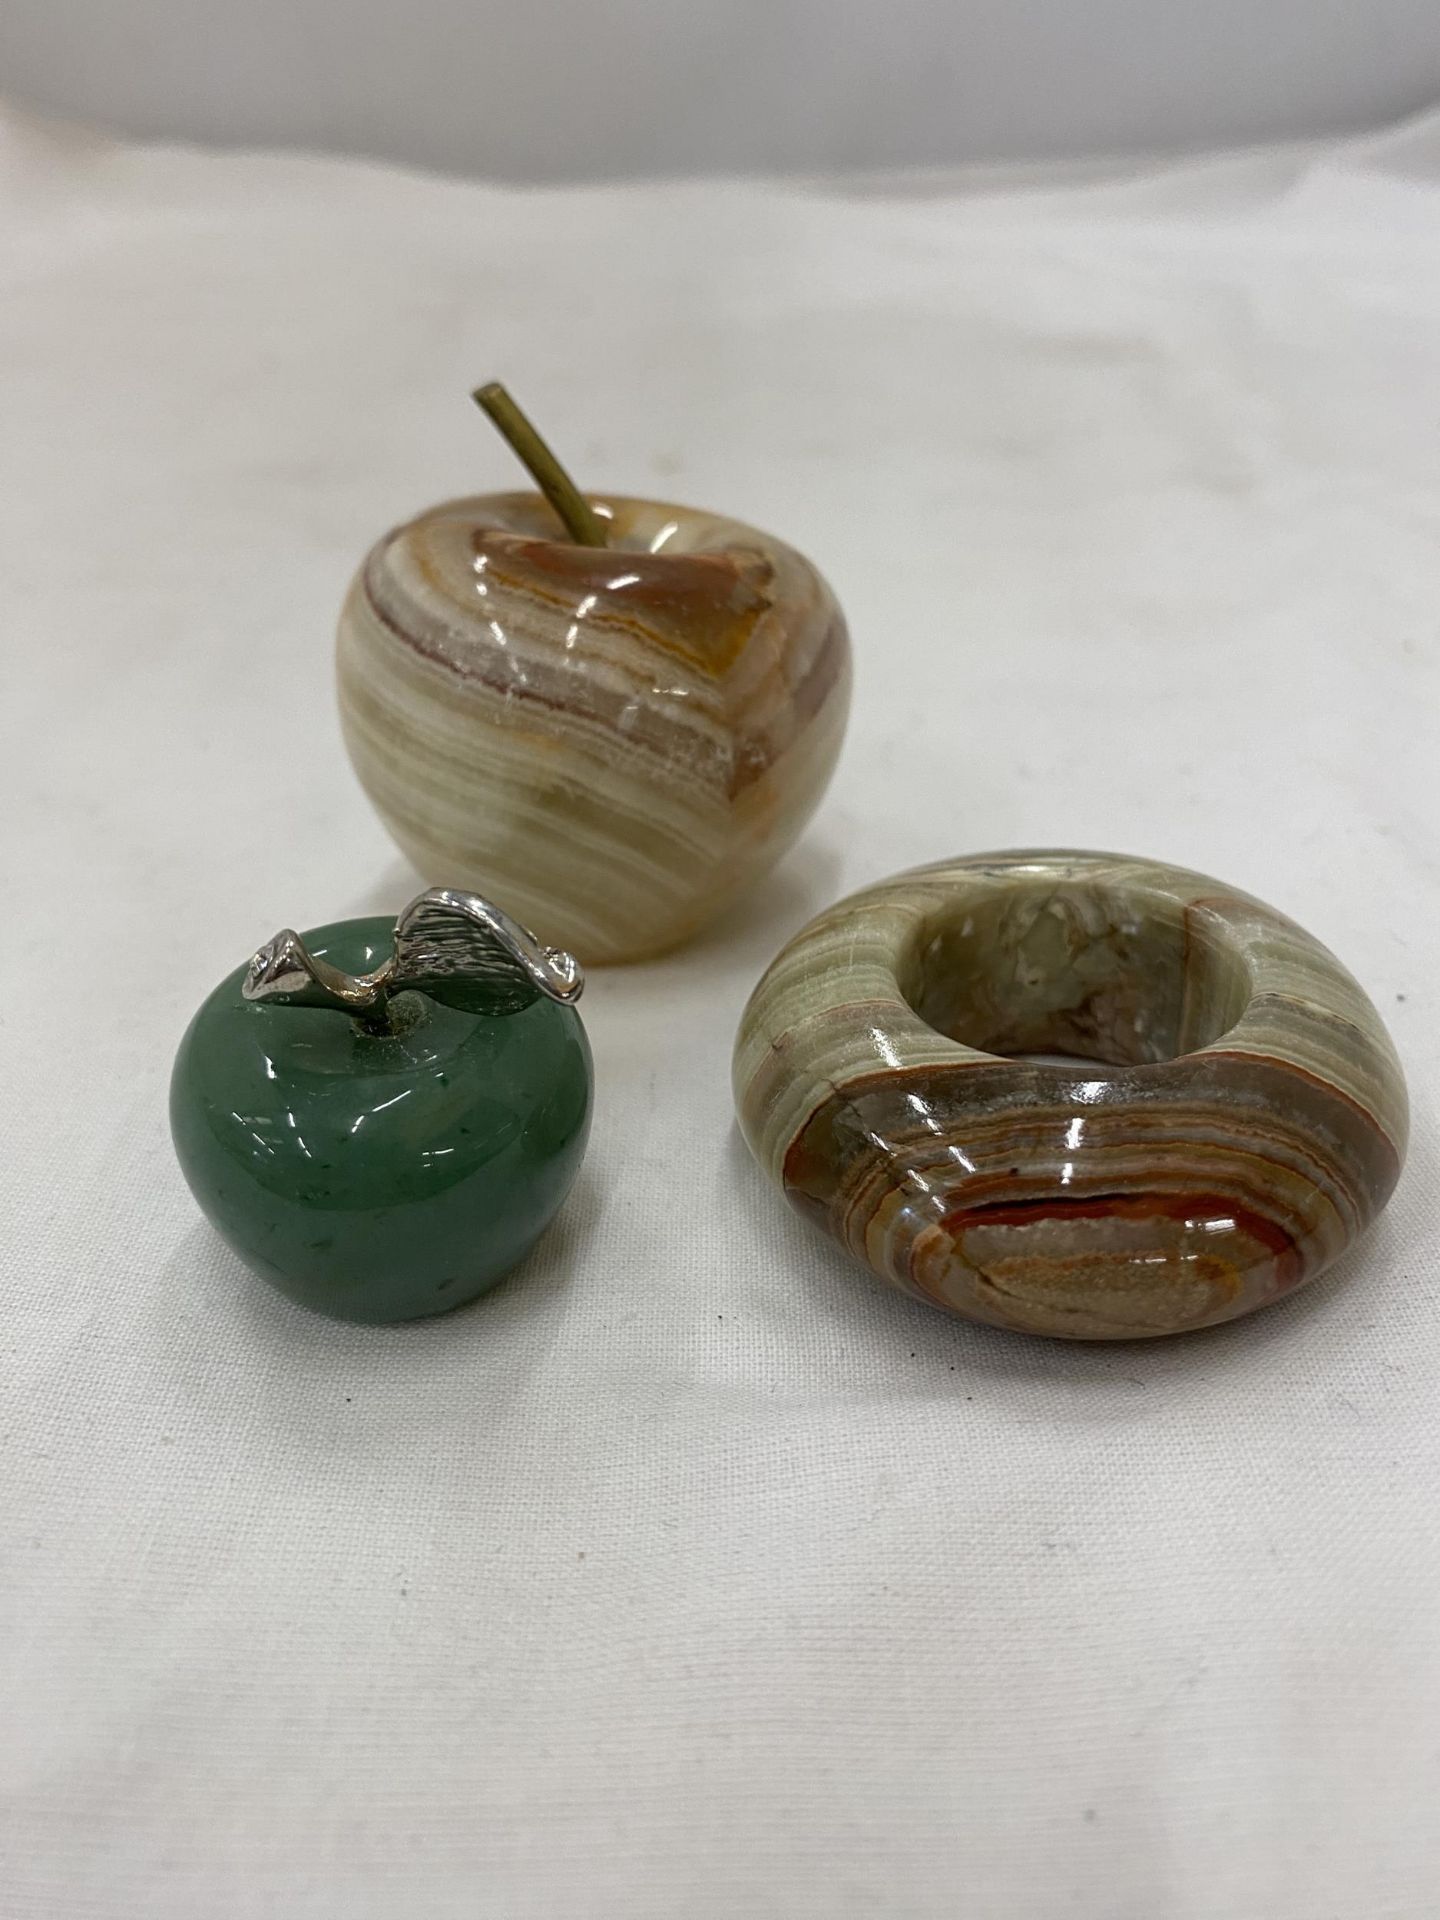 TWO NATURAL ONYX STONE APPLES - Image 2 of 3